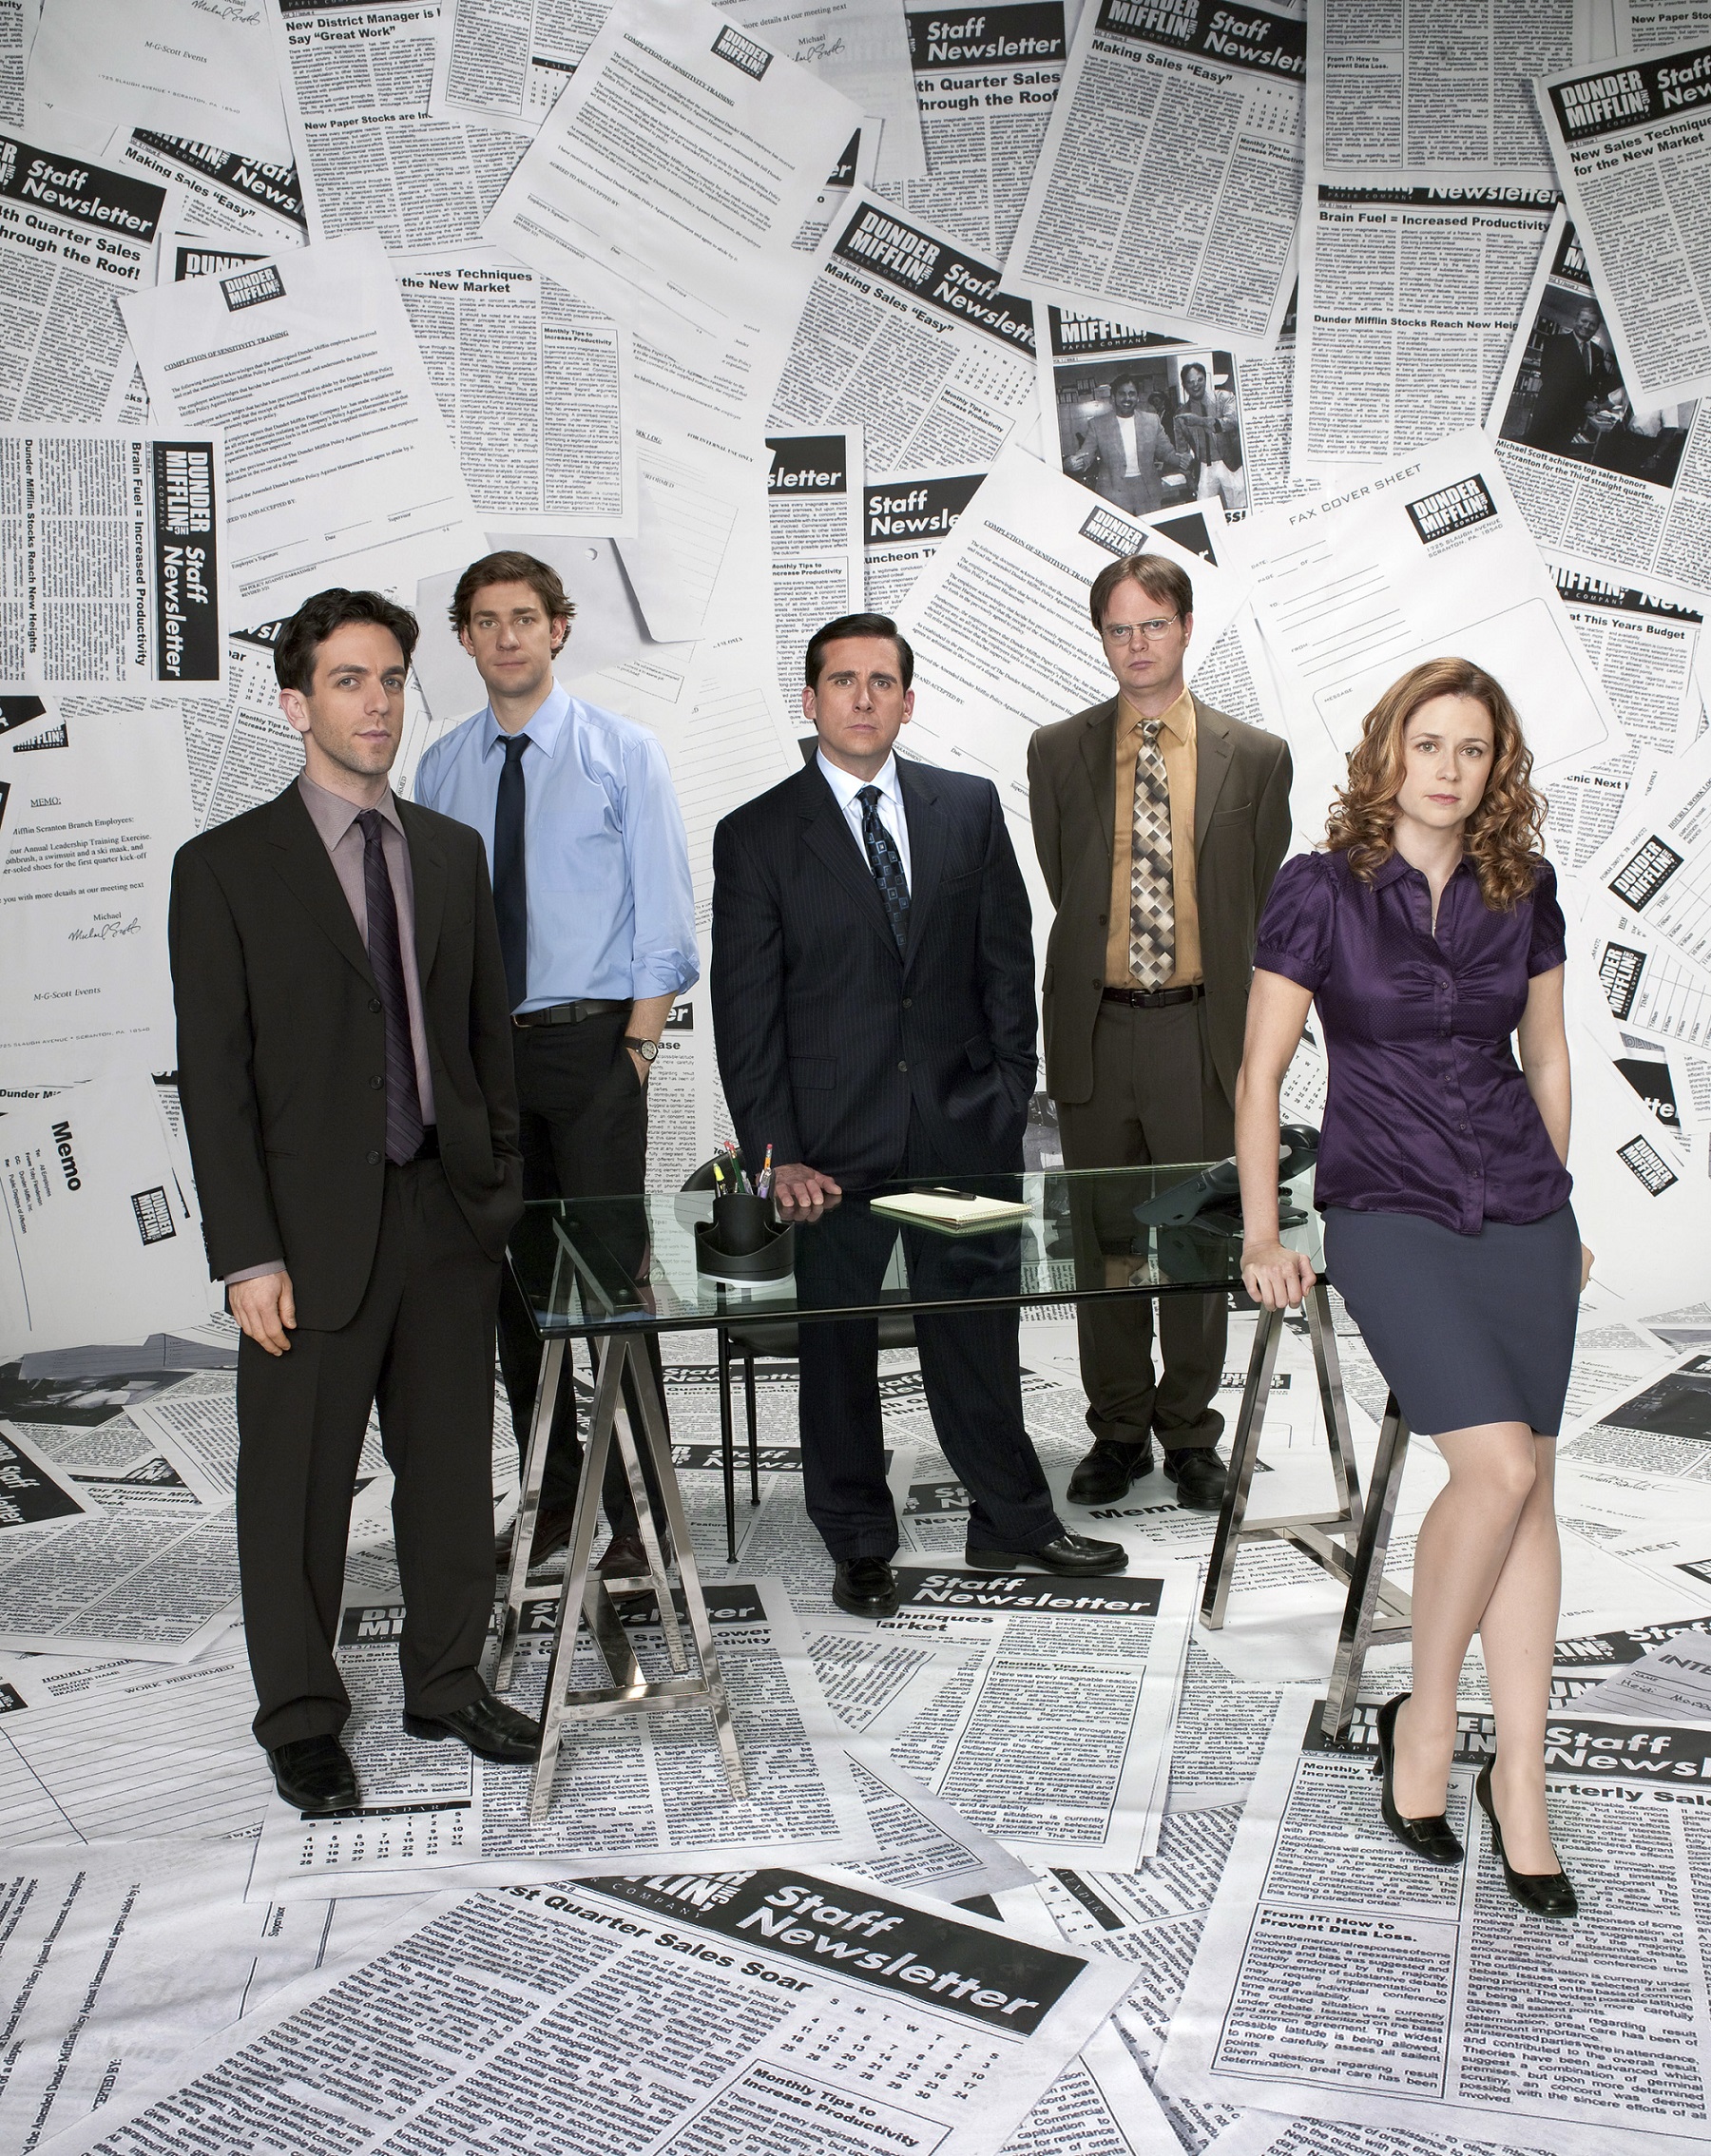 The OFfice cast